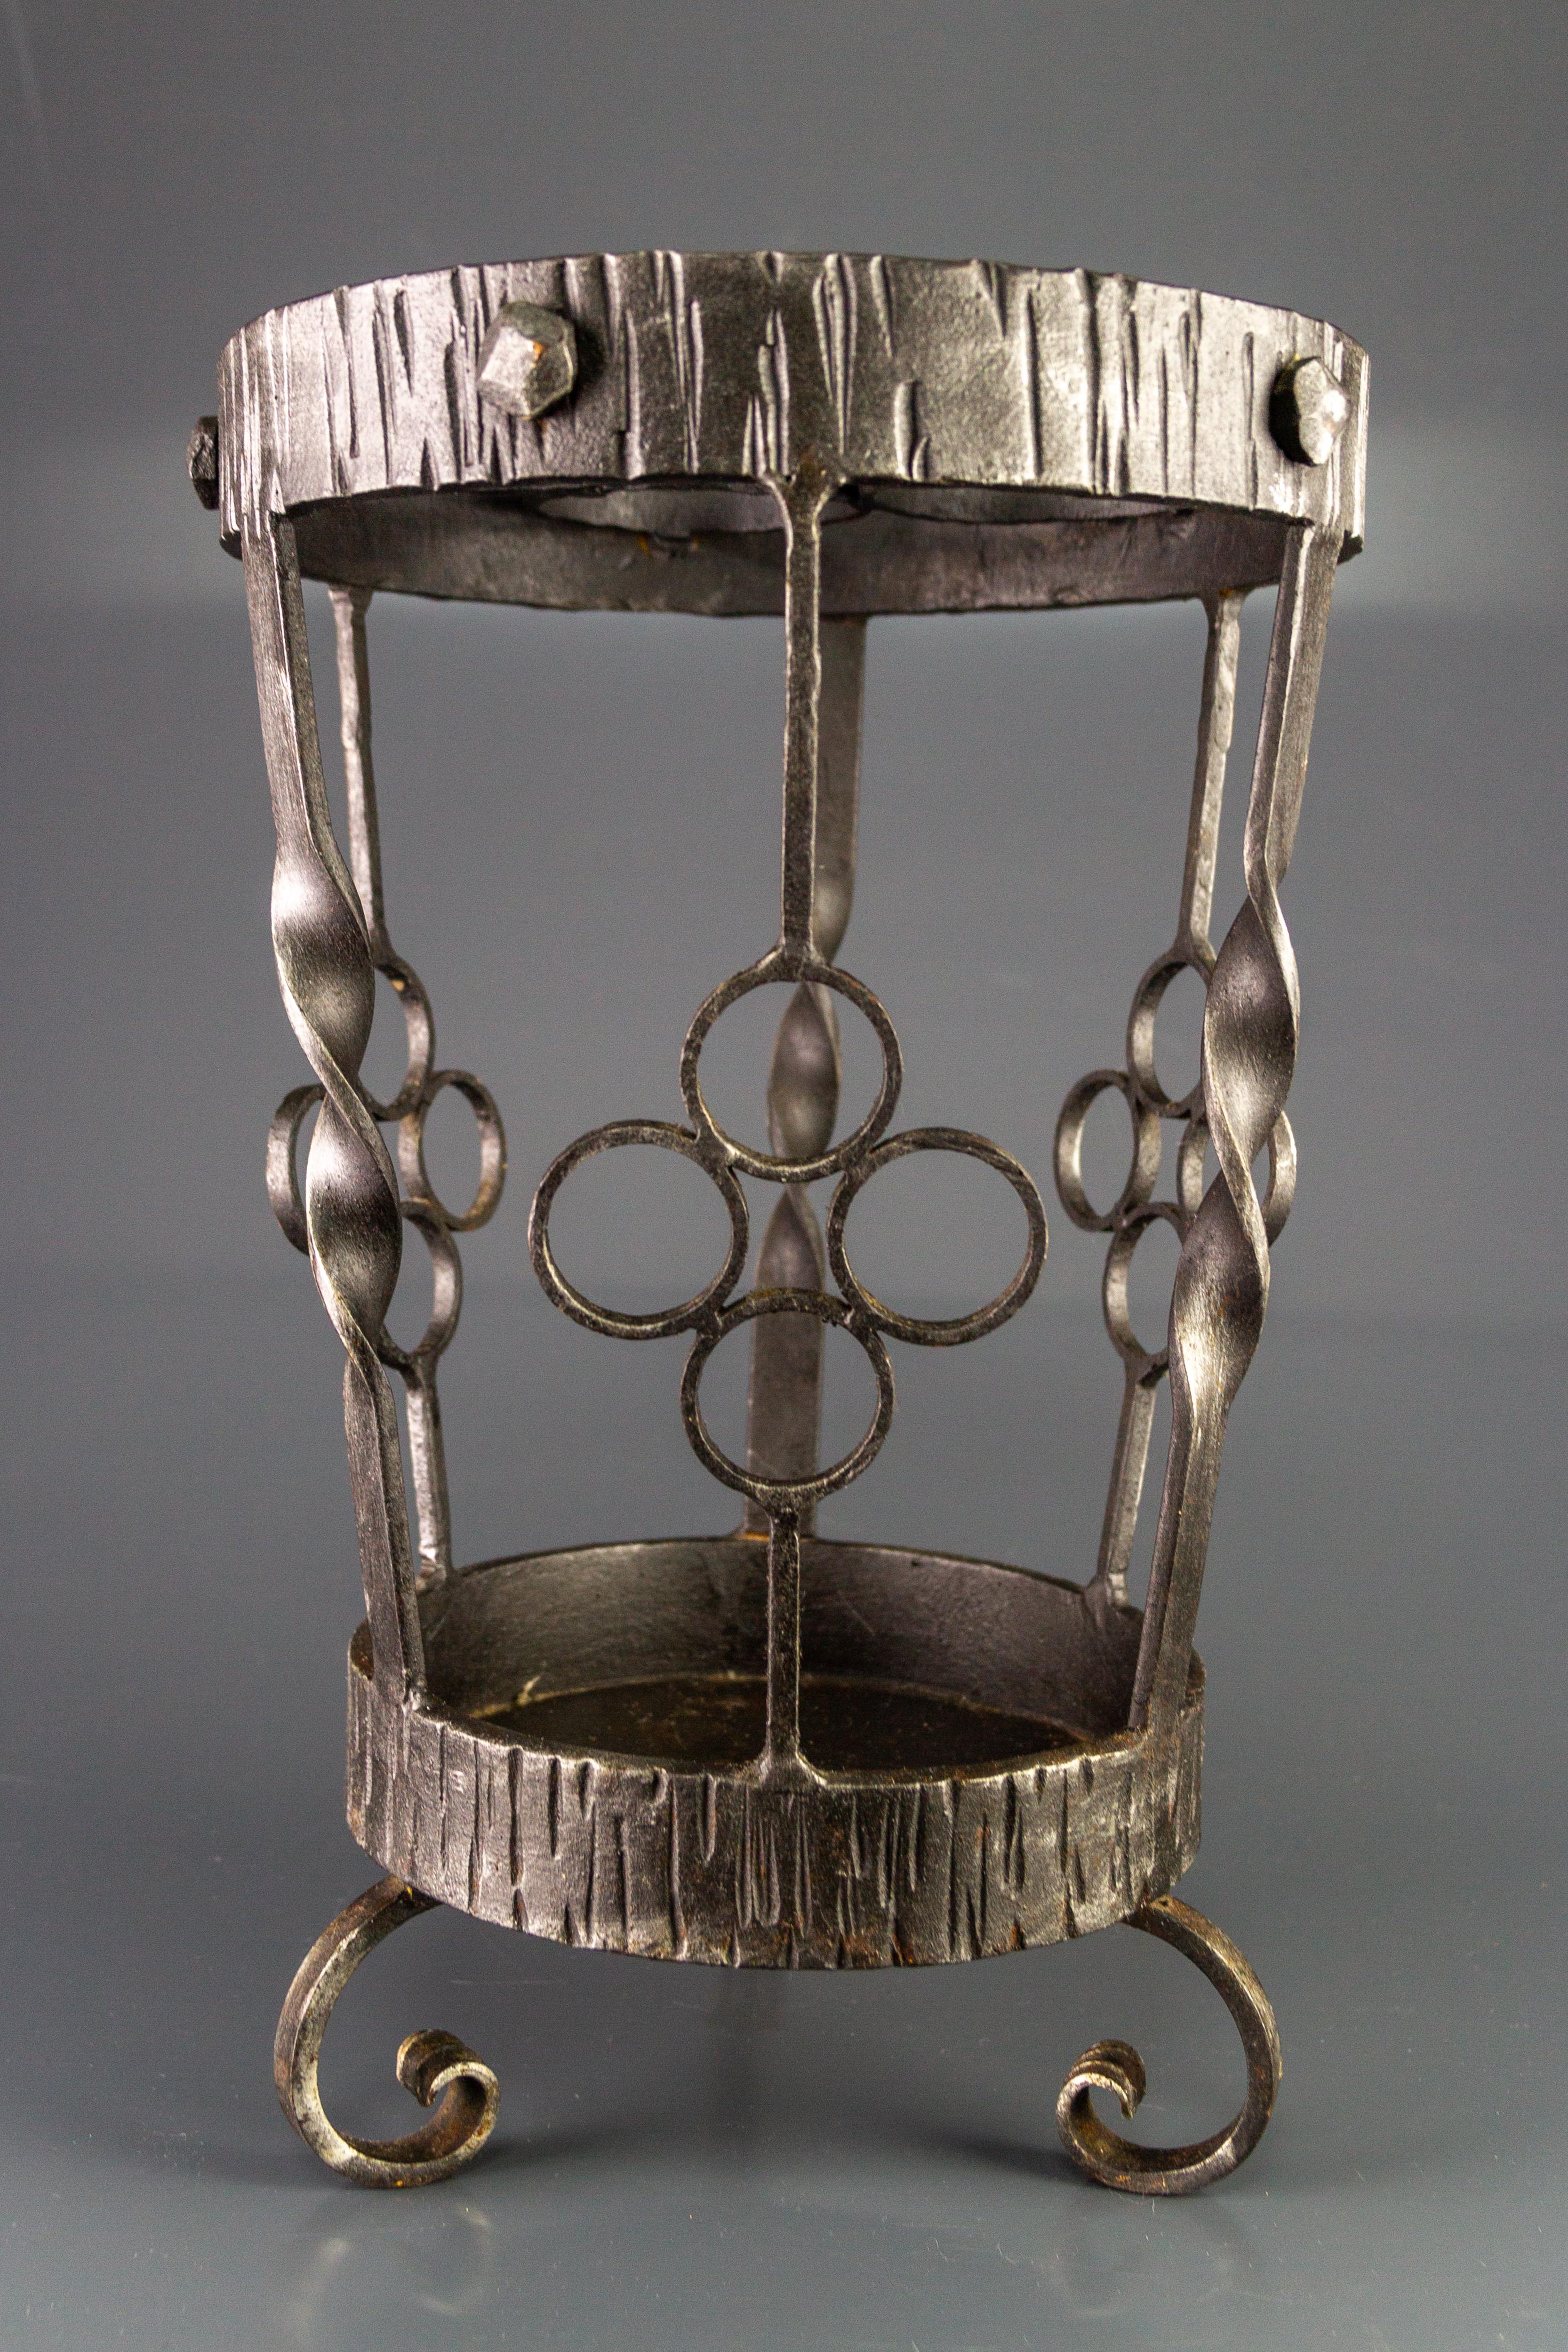 Vintage Art Deco style hand-wrought iron umbrella stand that can be used also as a cane holder. Germany, 1950s.
Dimensions: height: 40 cm / 15.74 in; diameter: 26 cm / 10.23 in.